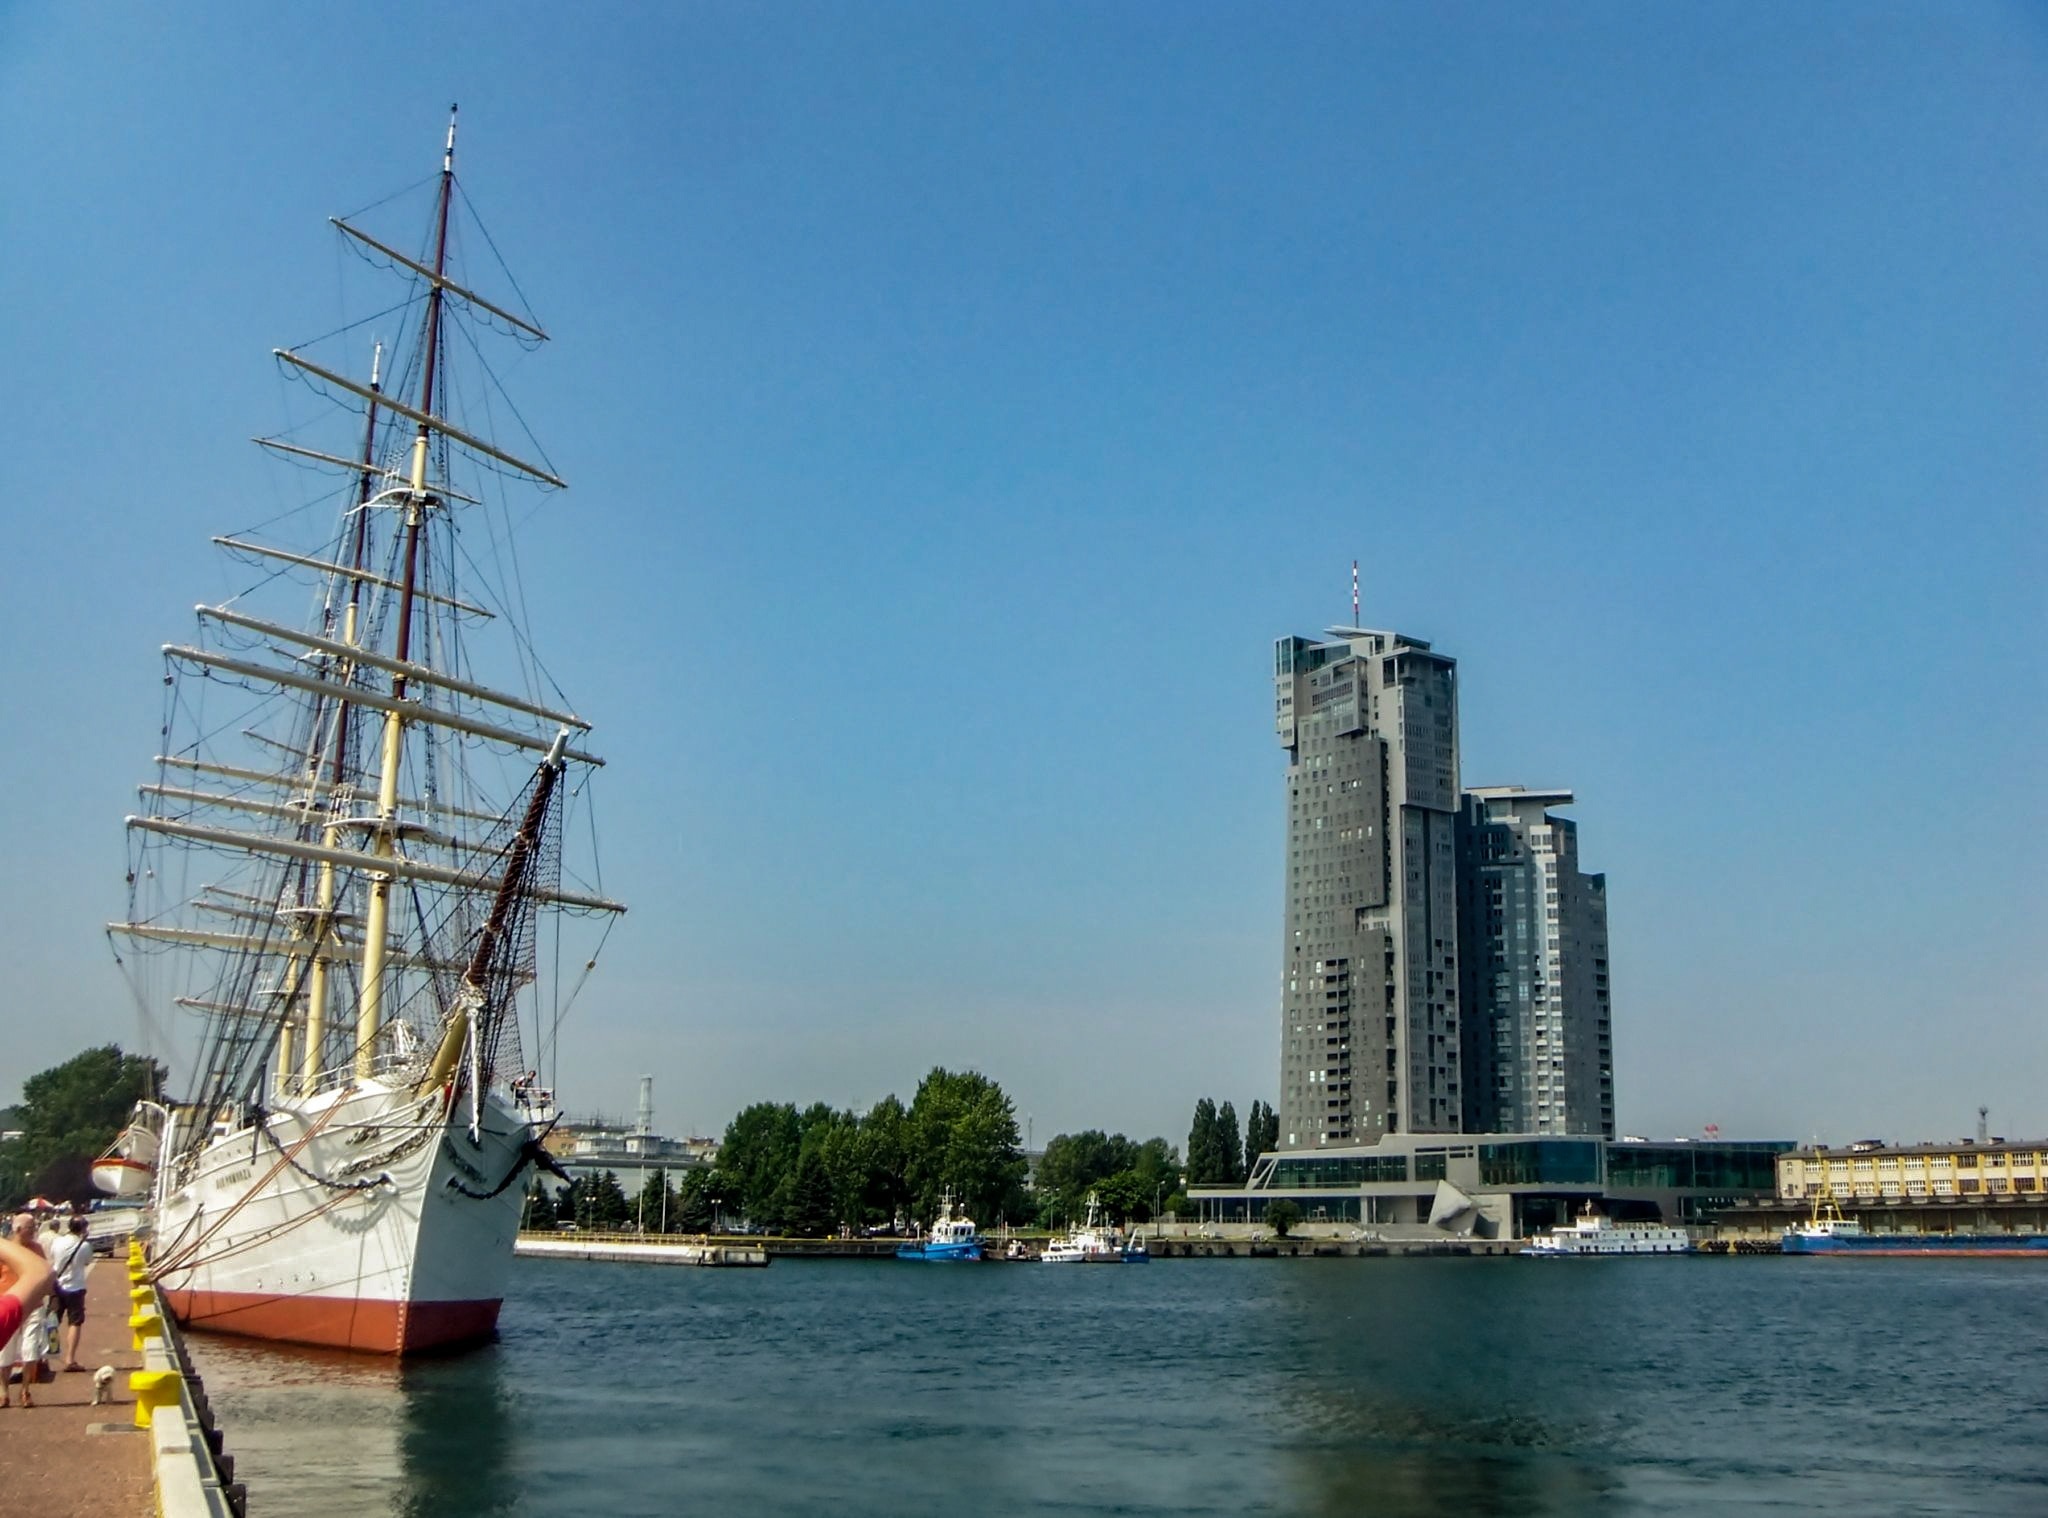 Beautiful tall ship, open as a visitor attraction in Gdynia.